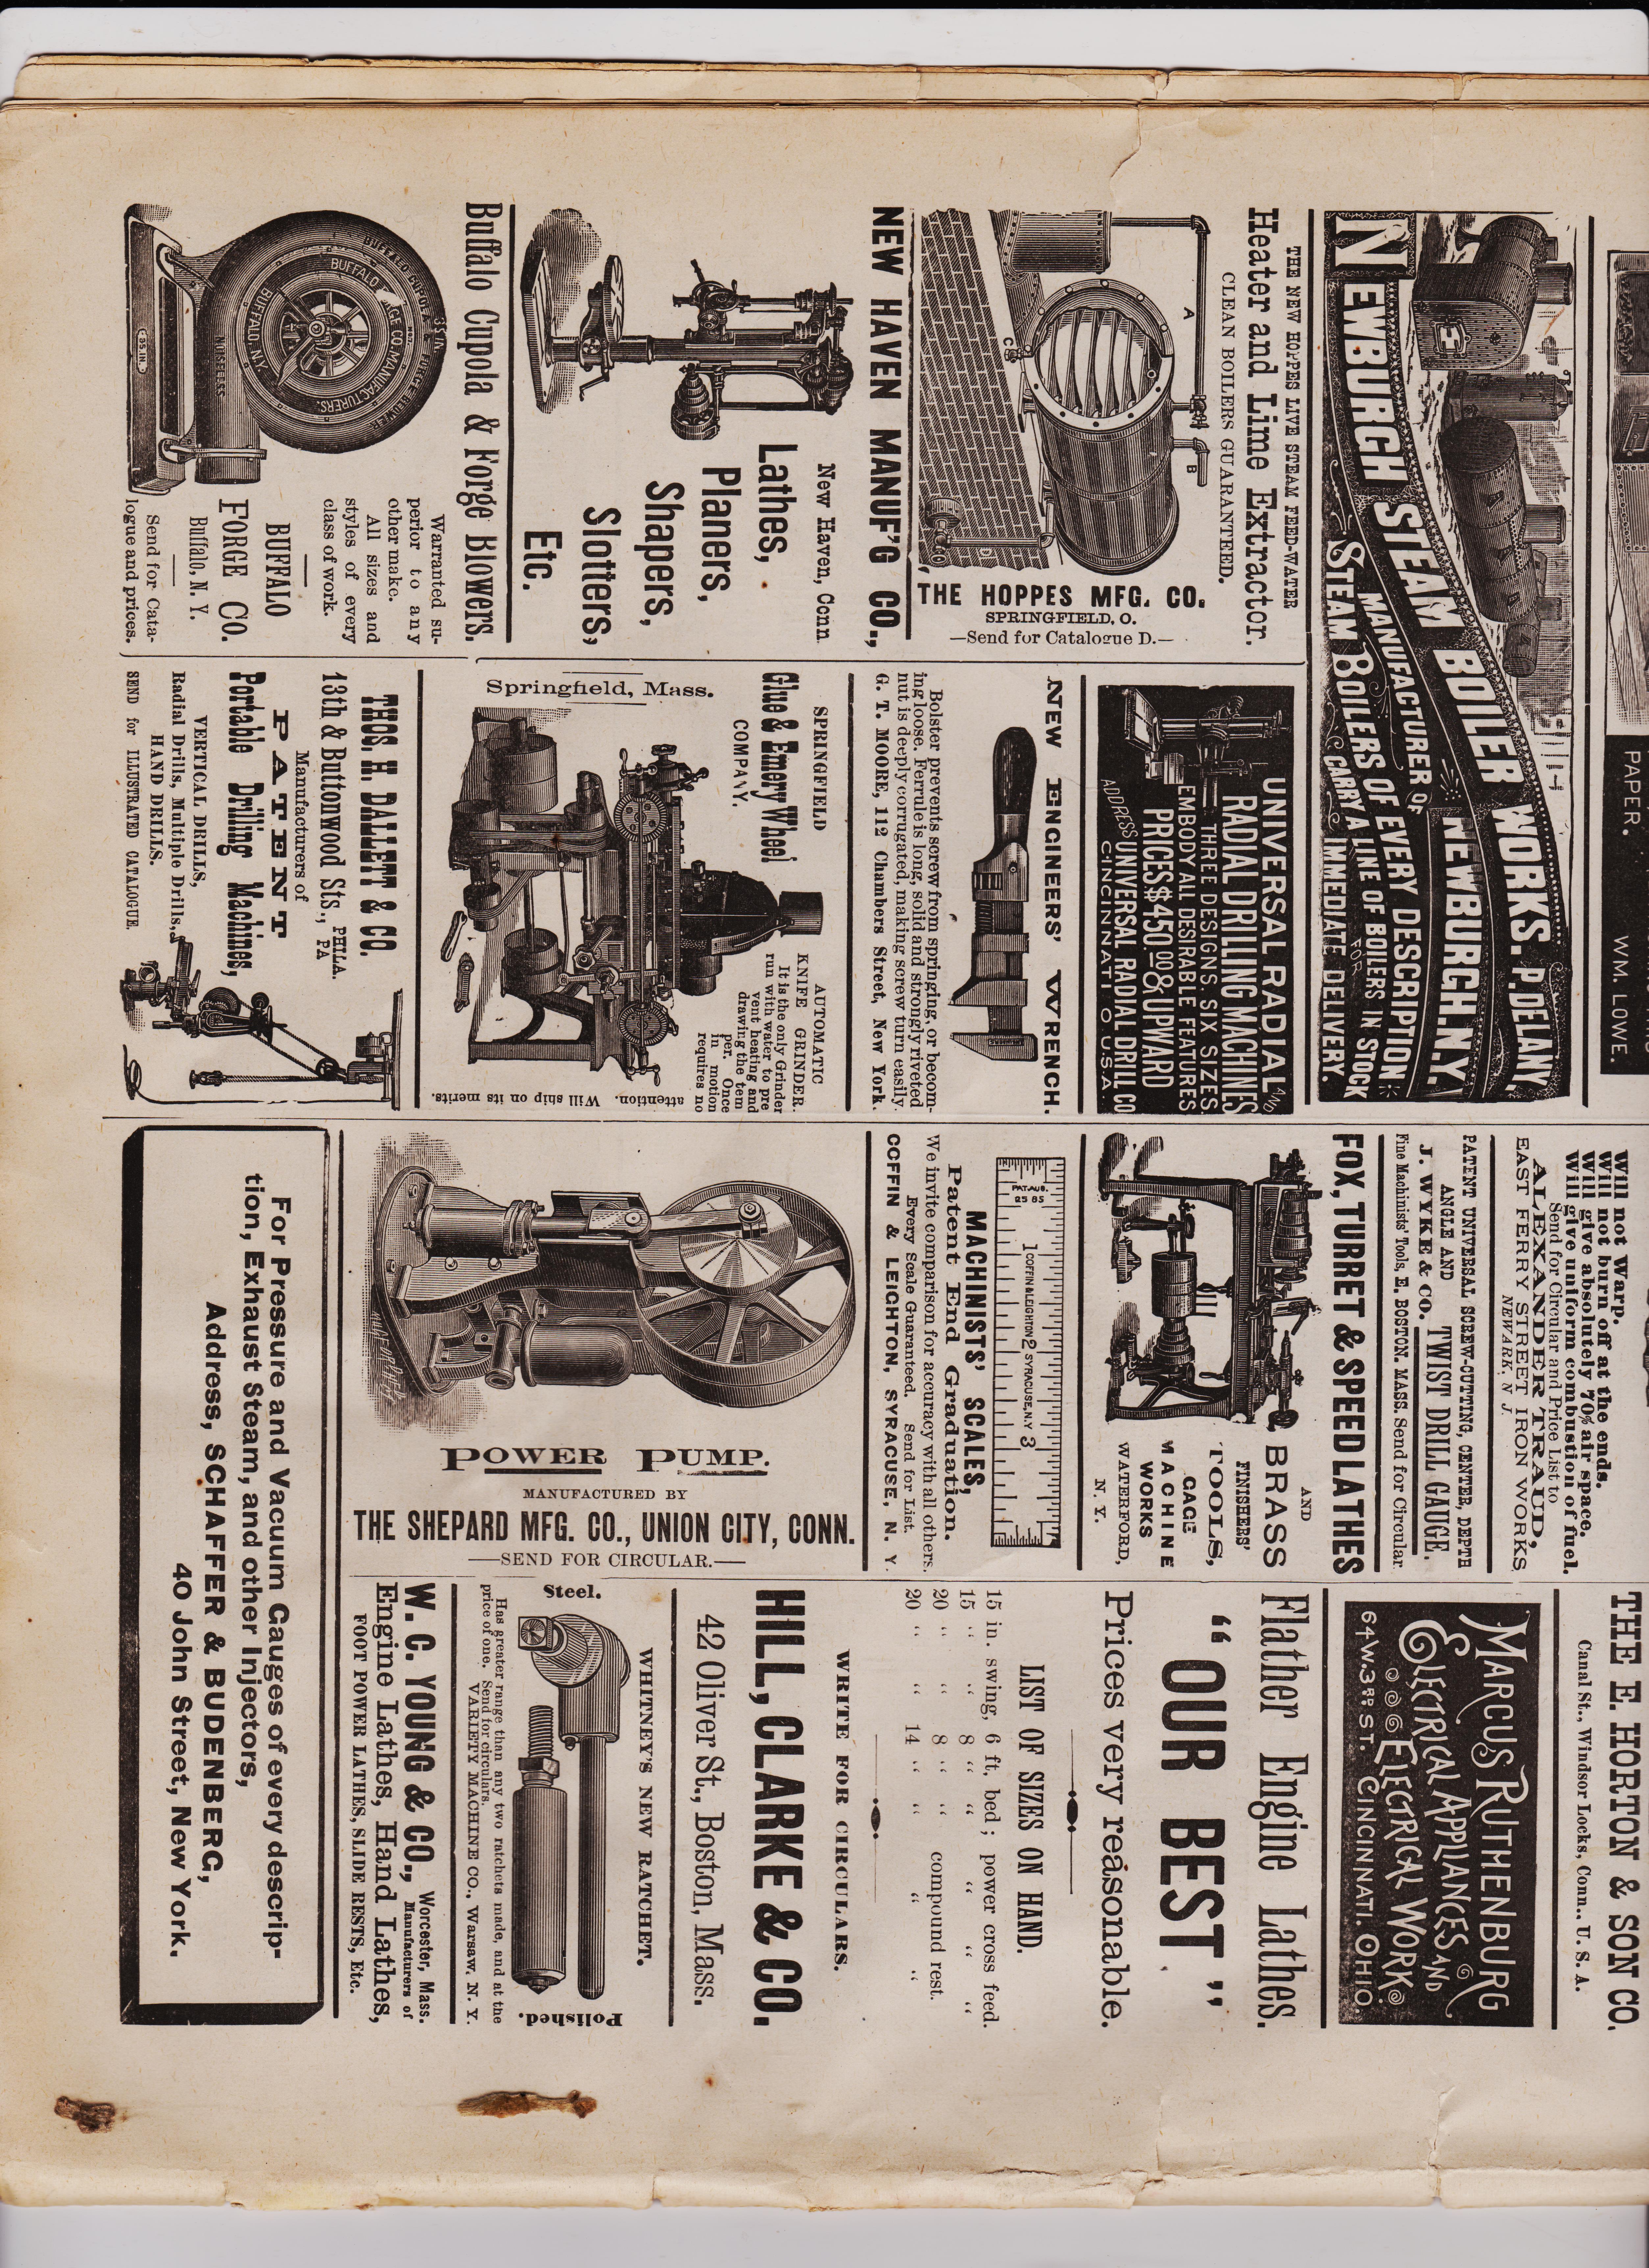 https://antiquemachinery.com/images-American-Machinist-Jan-22-1887/American-Machinist-Jan-15-1887-p-12-bot-Buffalo-Blower-and-Forge-Co-Glue-and-Emery-Co-Automatic-Knife-Grinders-New-Haven-Manufacturing-Co-Planers-Lathes-Shapers-Slotters-Fox-Turret-and-Speed-Lathes-Hill-Clark-.jpeg